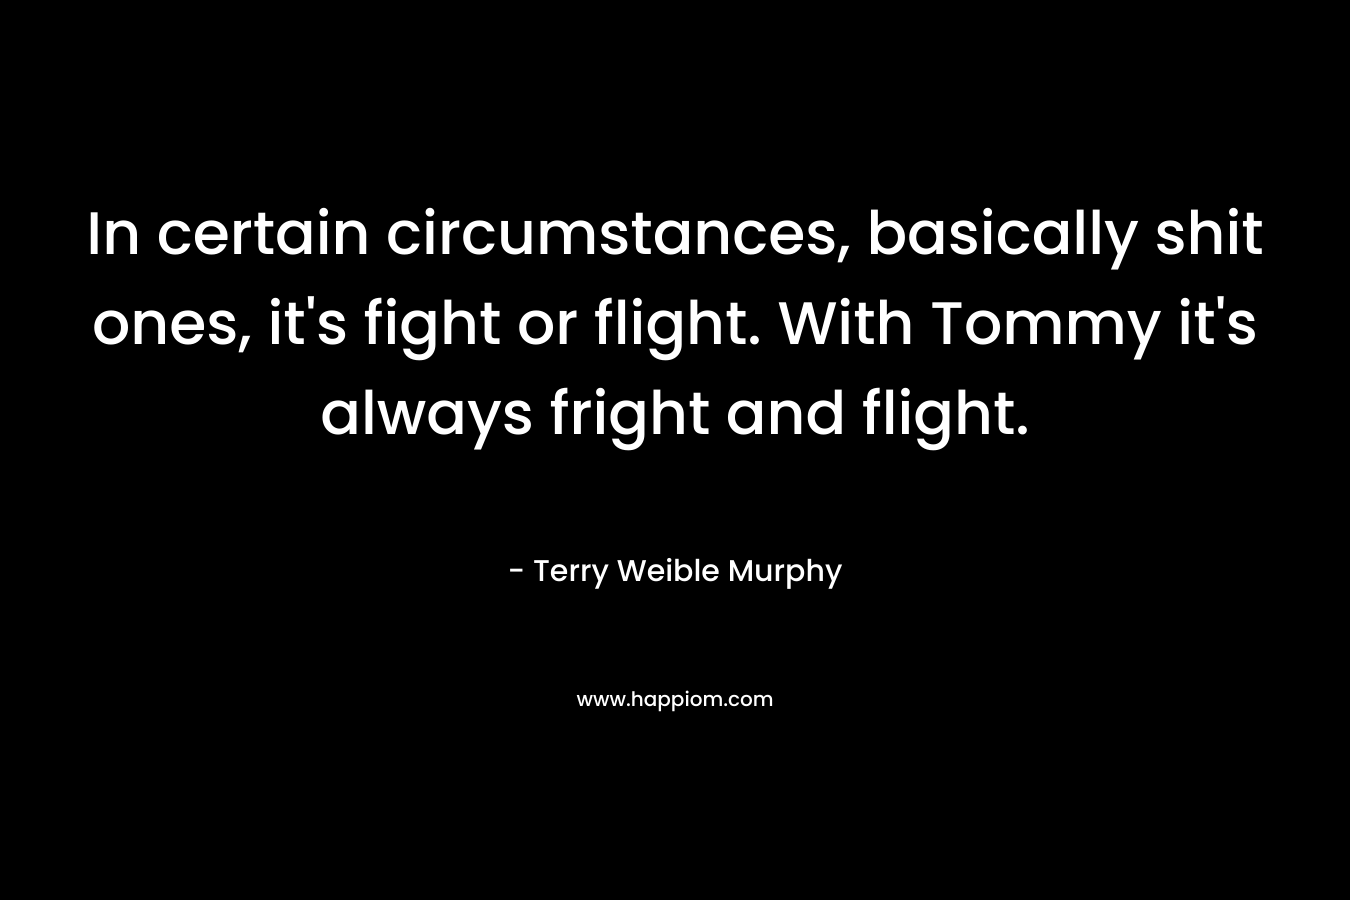 In certain circumstances, basically shit ones, it's fight or flight. With Tommy it's always fright and flight.